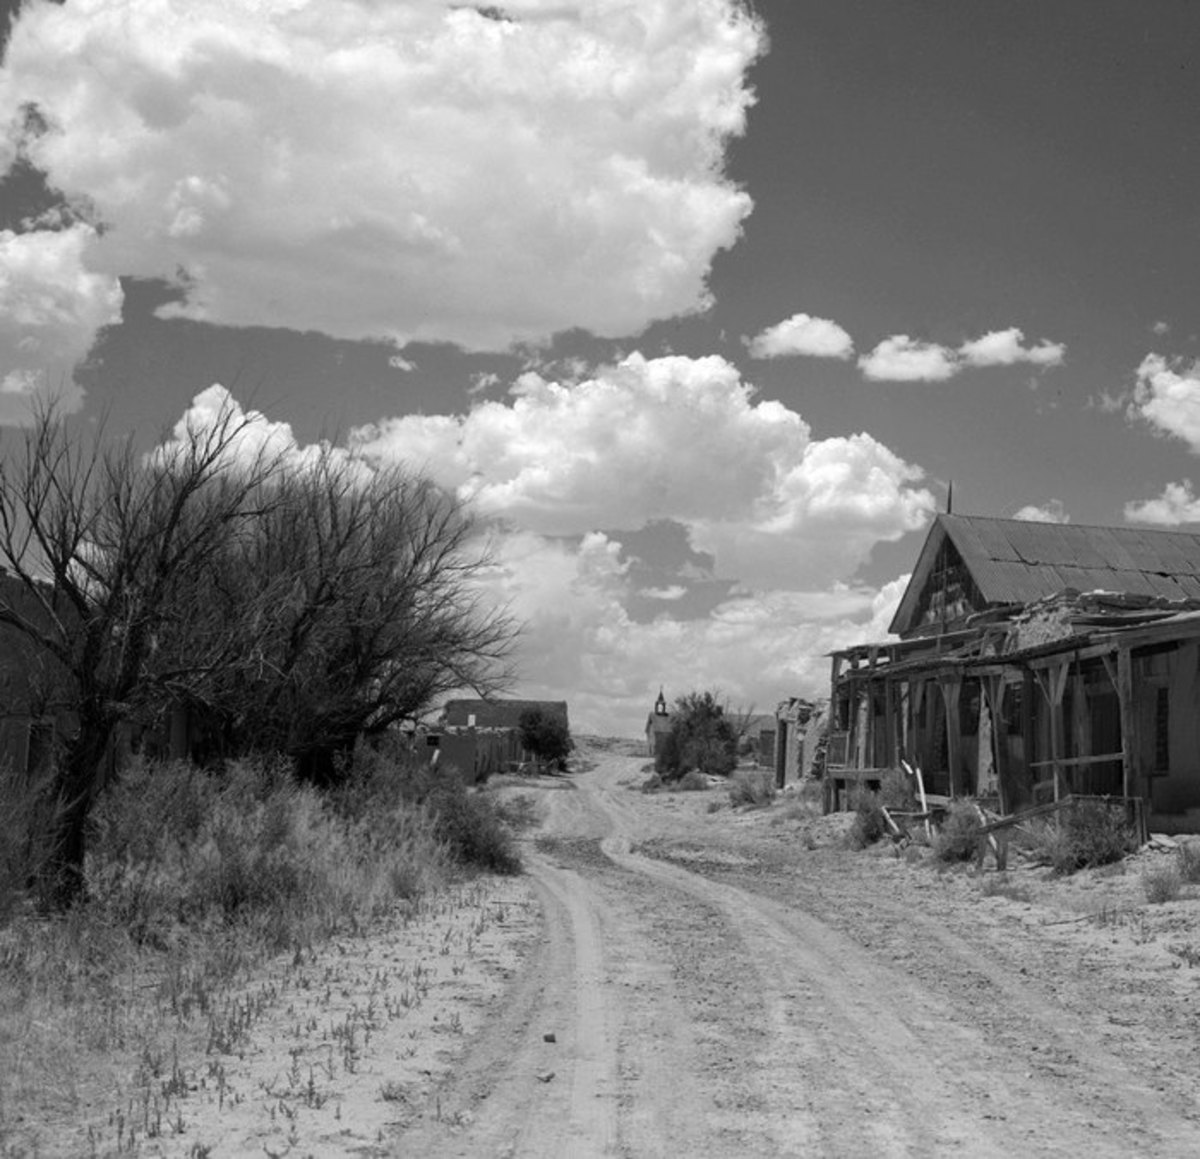 New Mexico ghost towns and their history